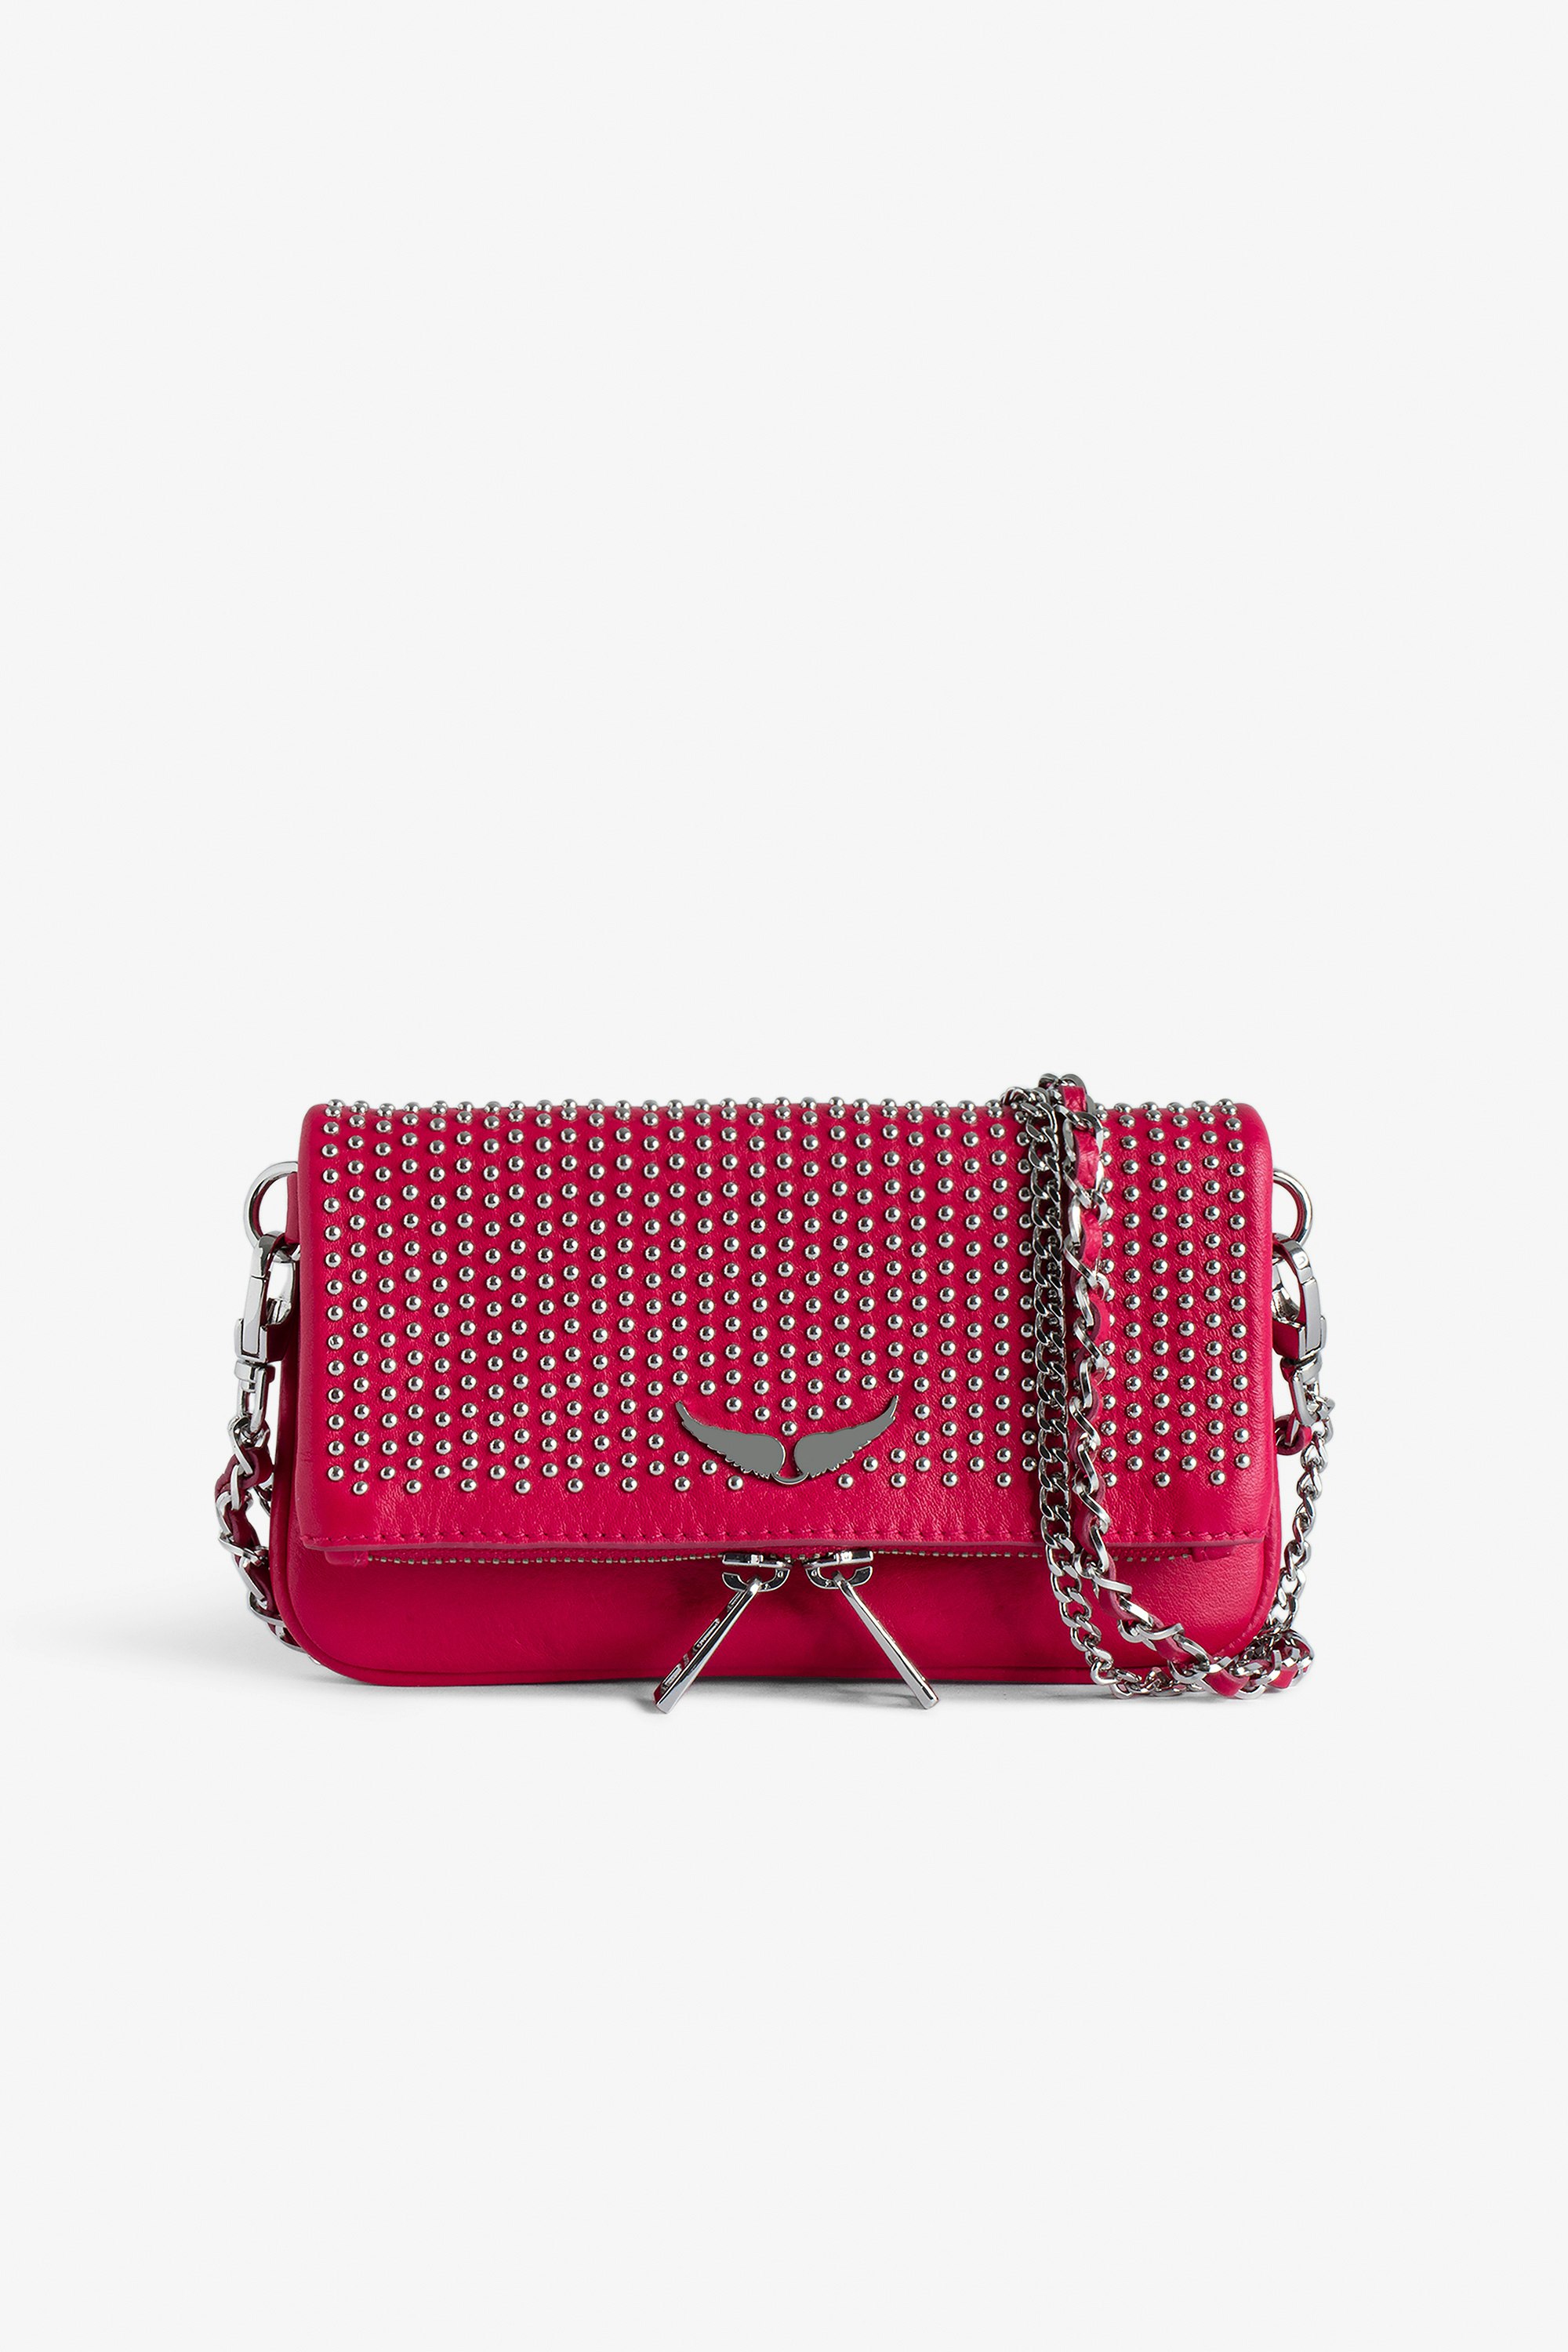 Rock Nano Dotted Swiss Clutch - Women’s small pink grained leather clutch with dotted Swiss studs, chains and wings.